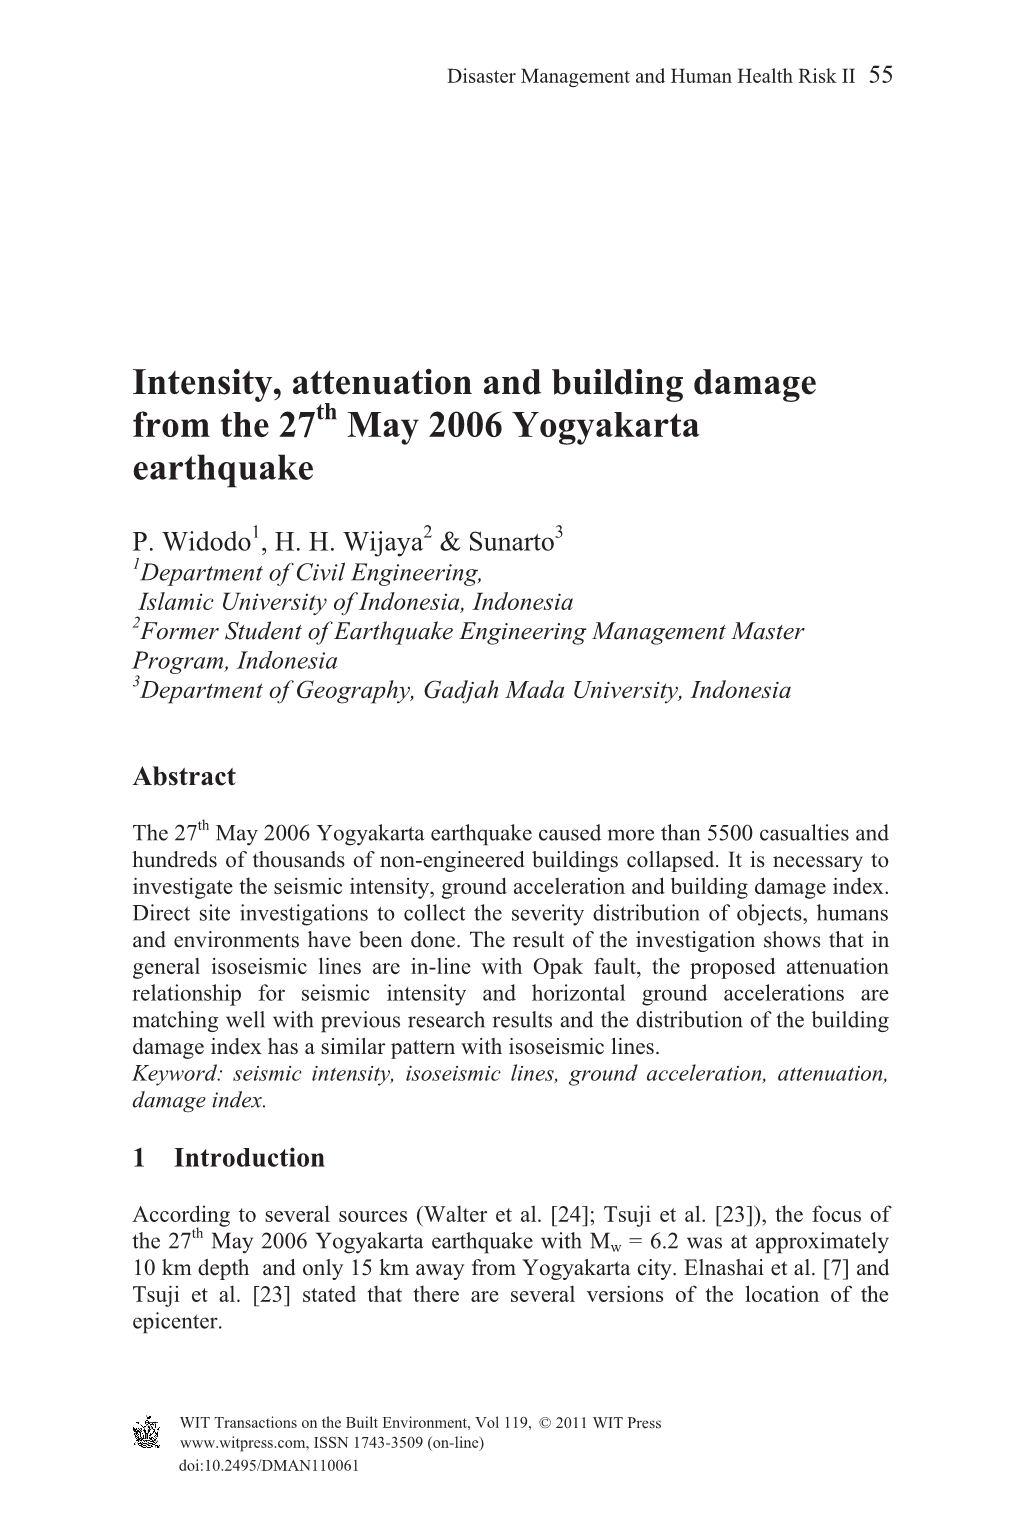 Intensity, Attenuation and Building Damage from the 27Th May 2006 Yogyakarta Earthquake